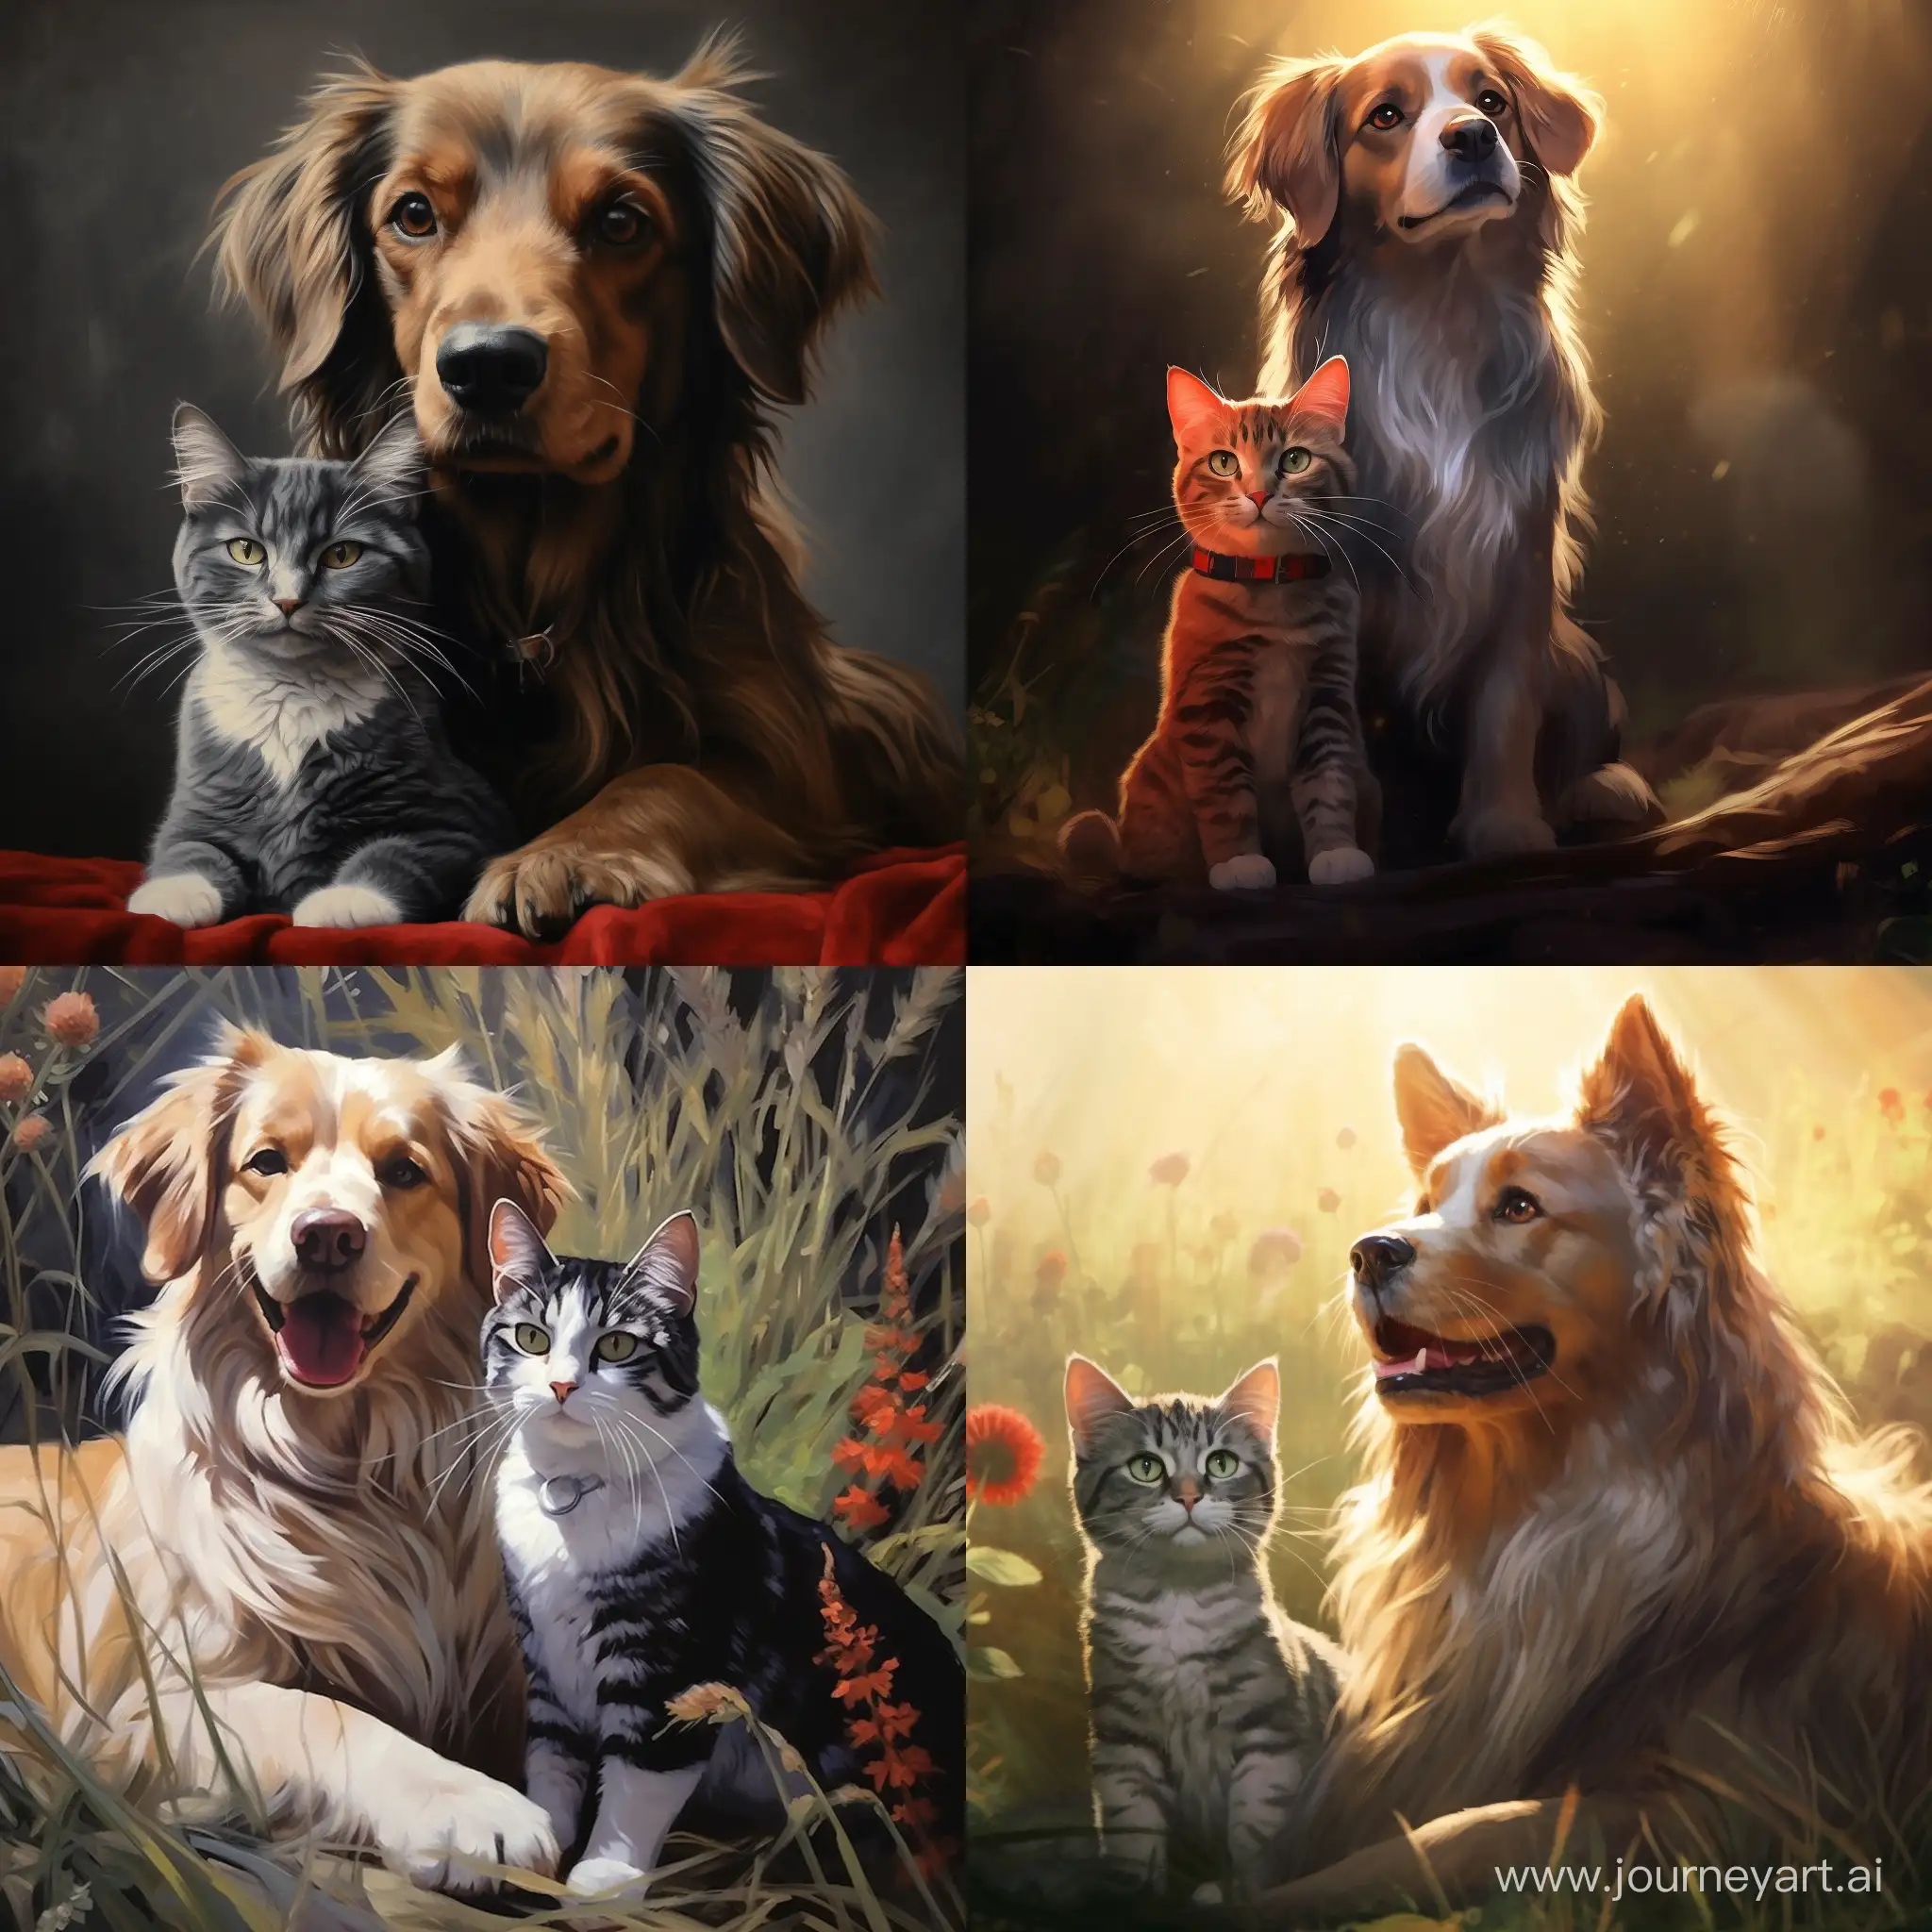 Adorable-Dog-and-Cat-Friendship-Art